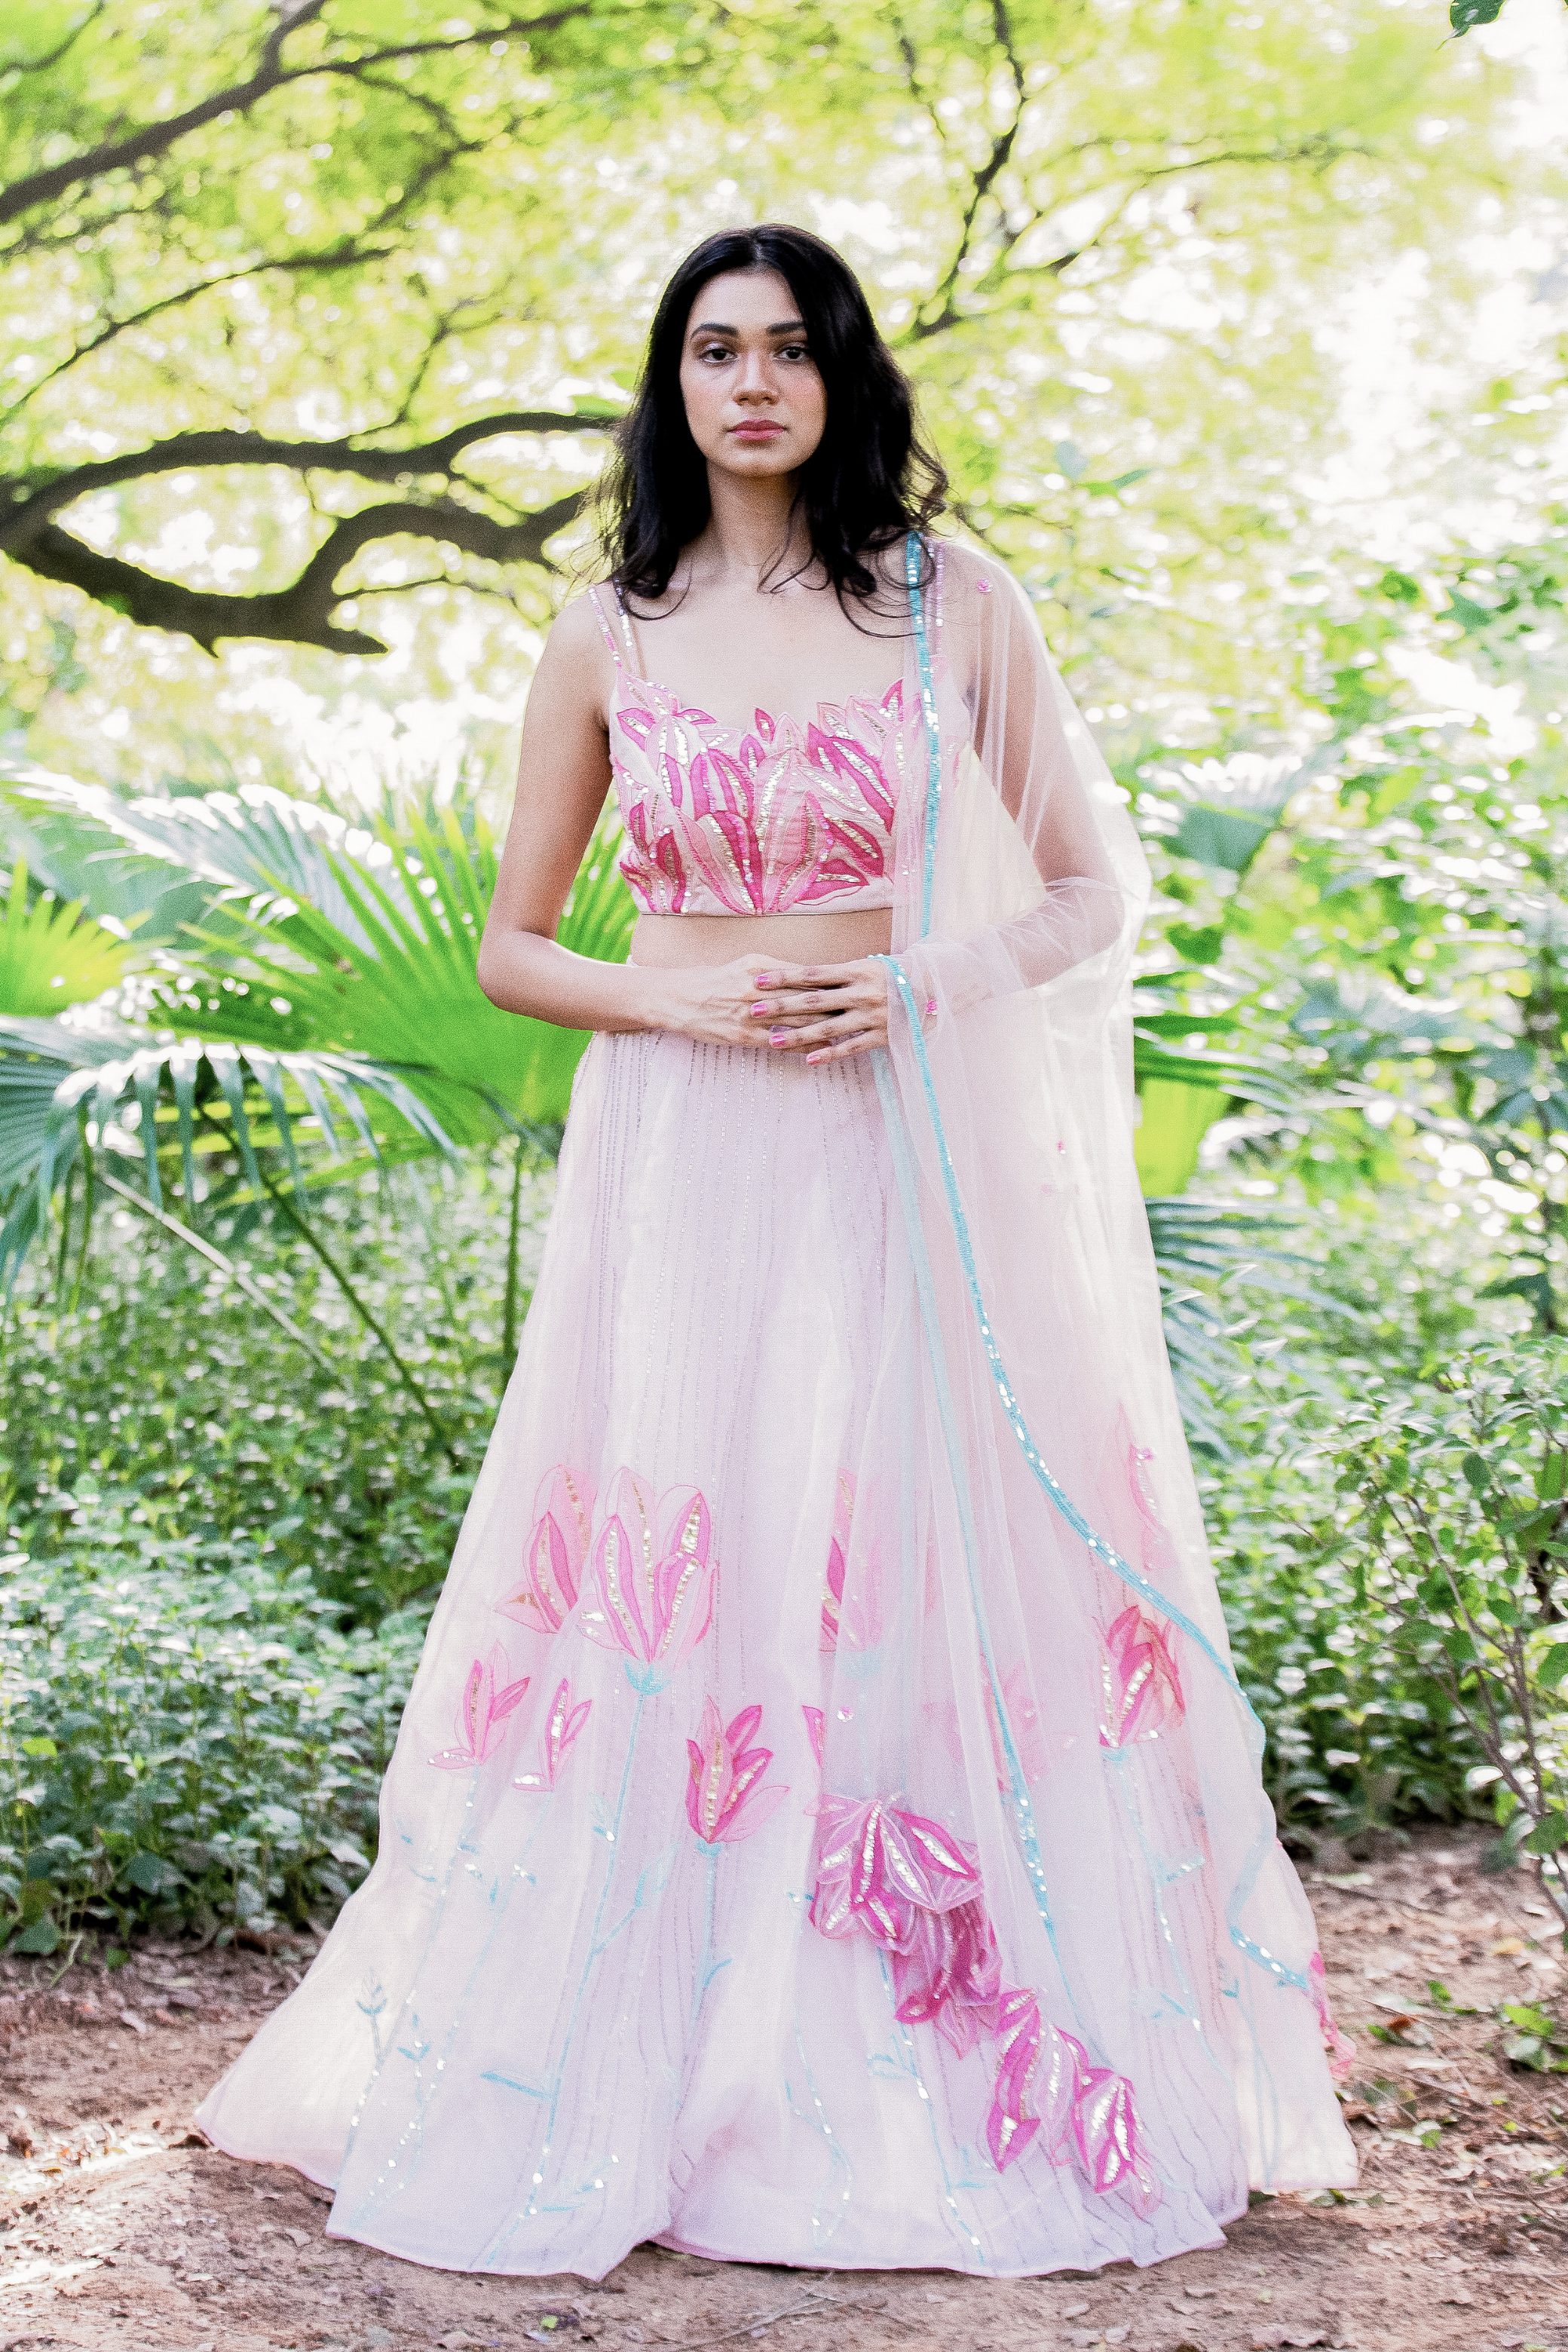 This set features a rose water pink  hand embroidered organza skirt set